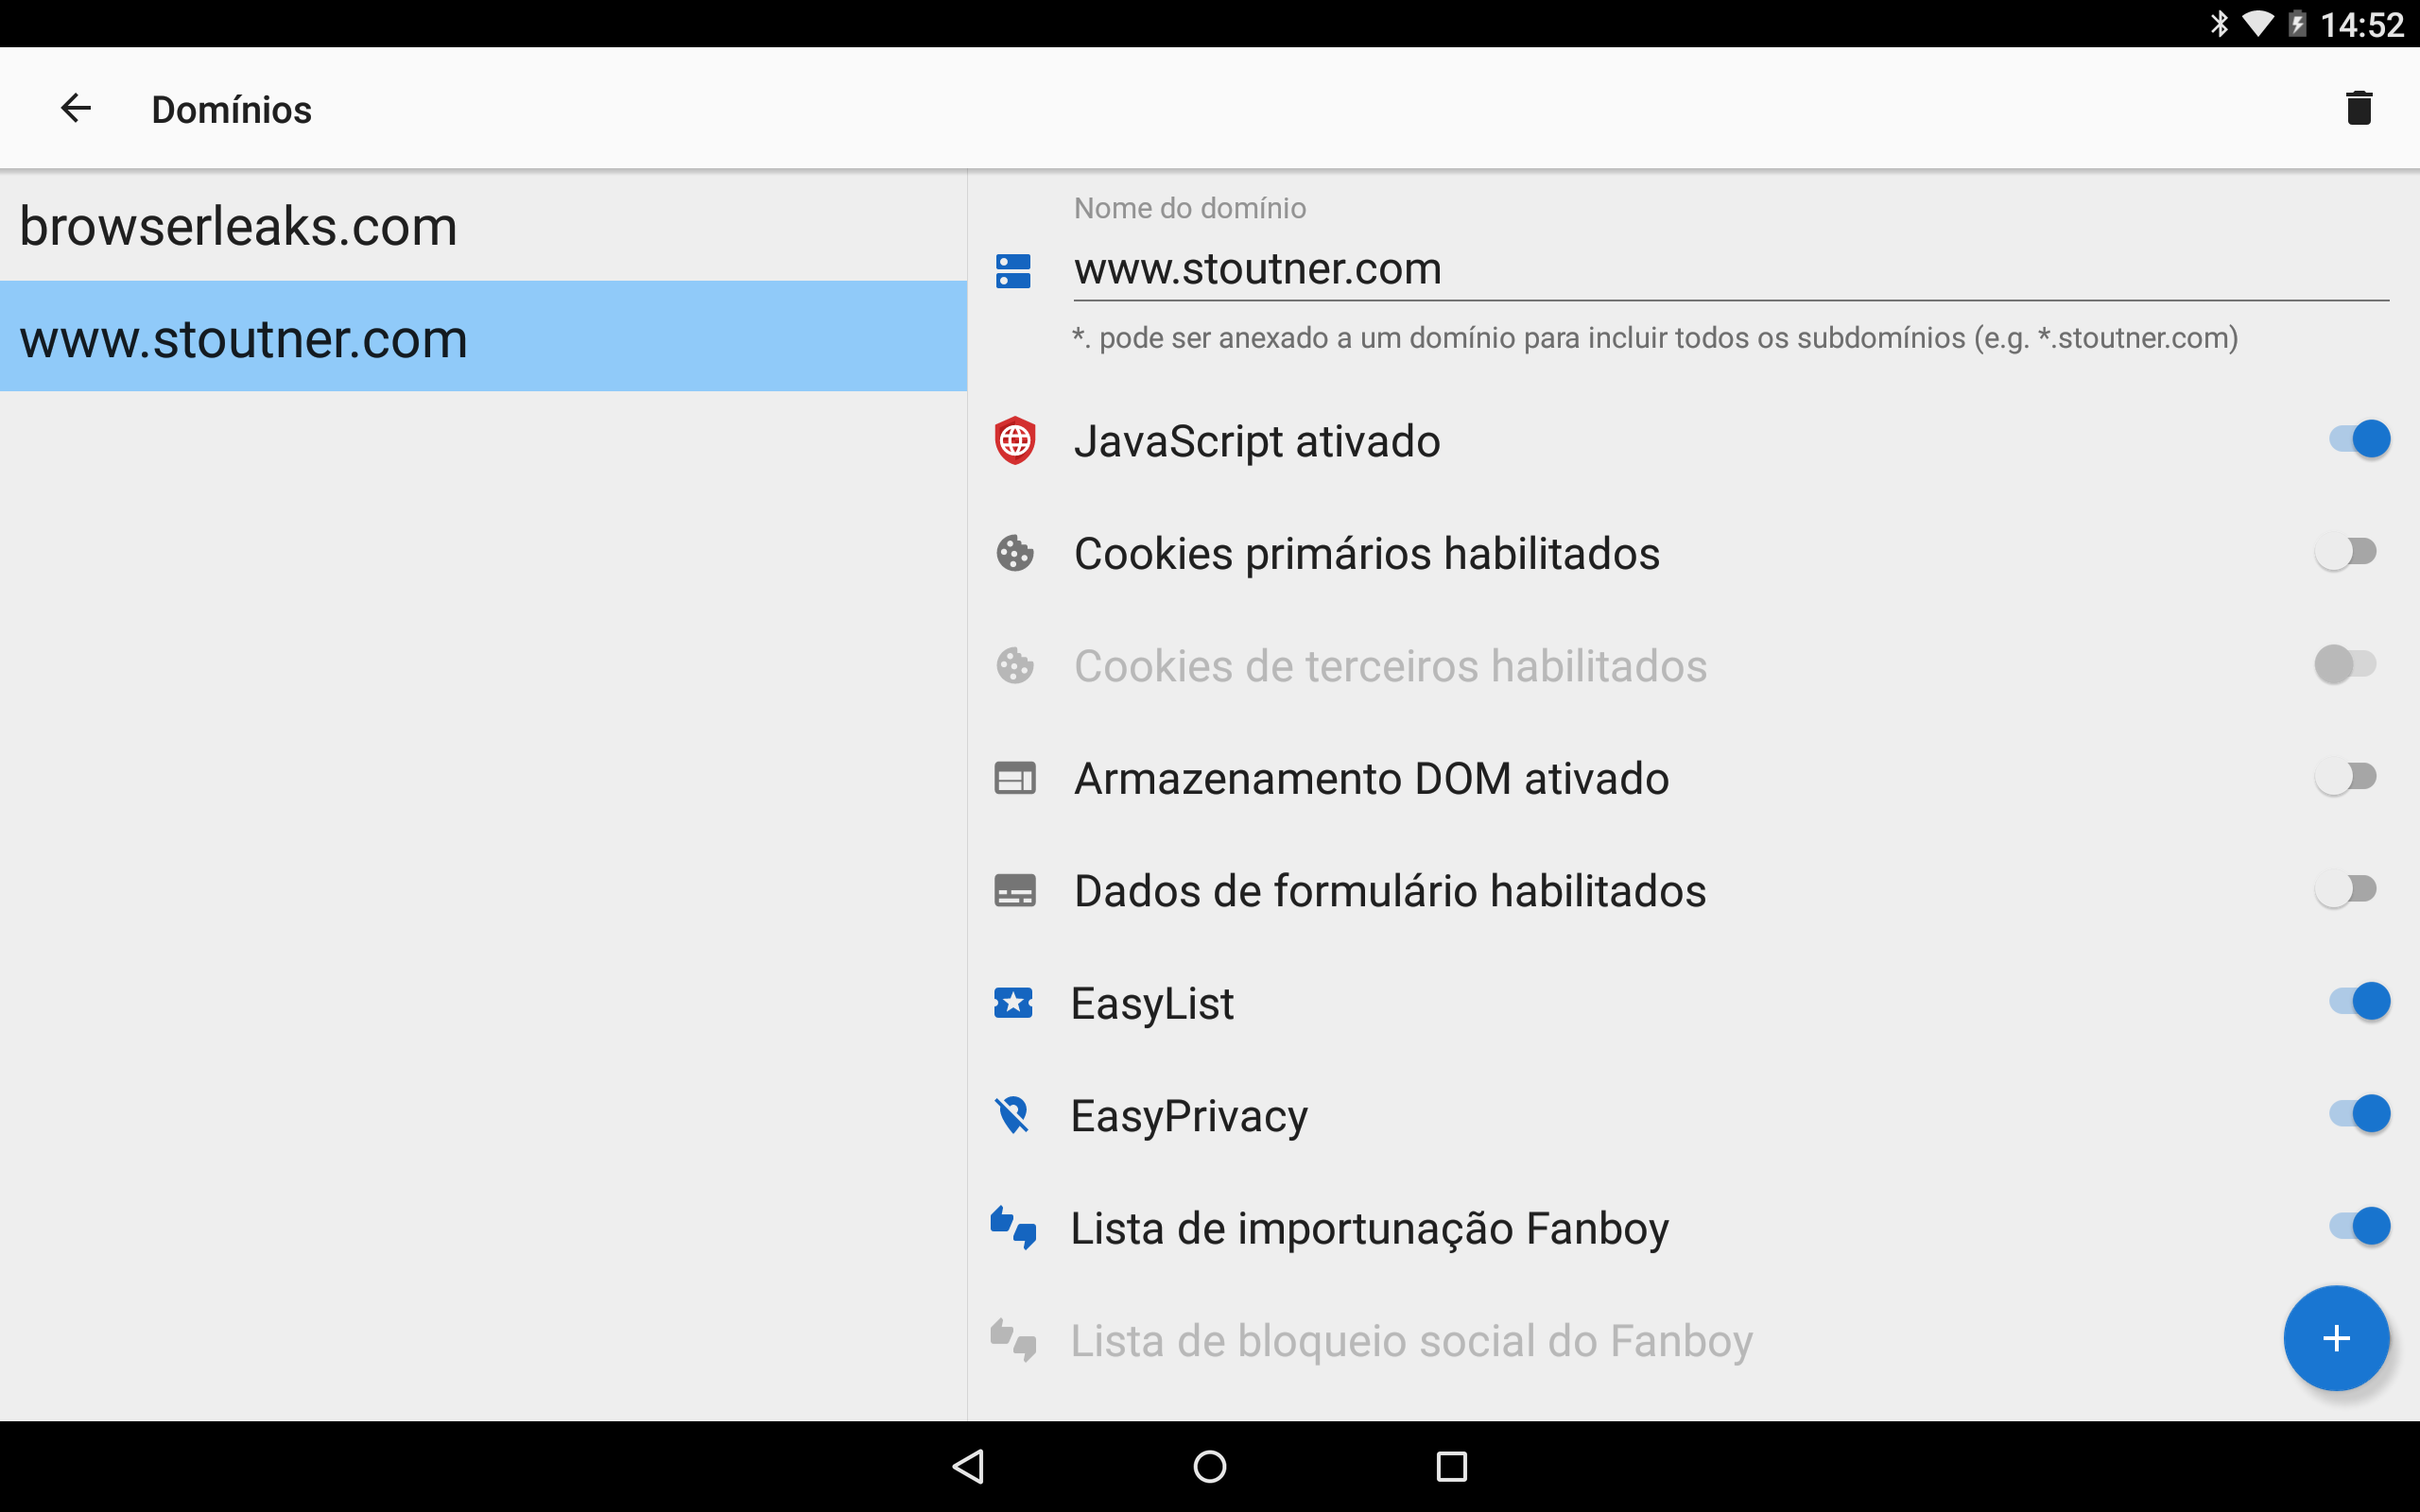 fastlane/metadata/android/pt-BR/images/phoneScreenshots/07-10-InchTabletDomains.png